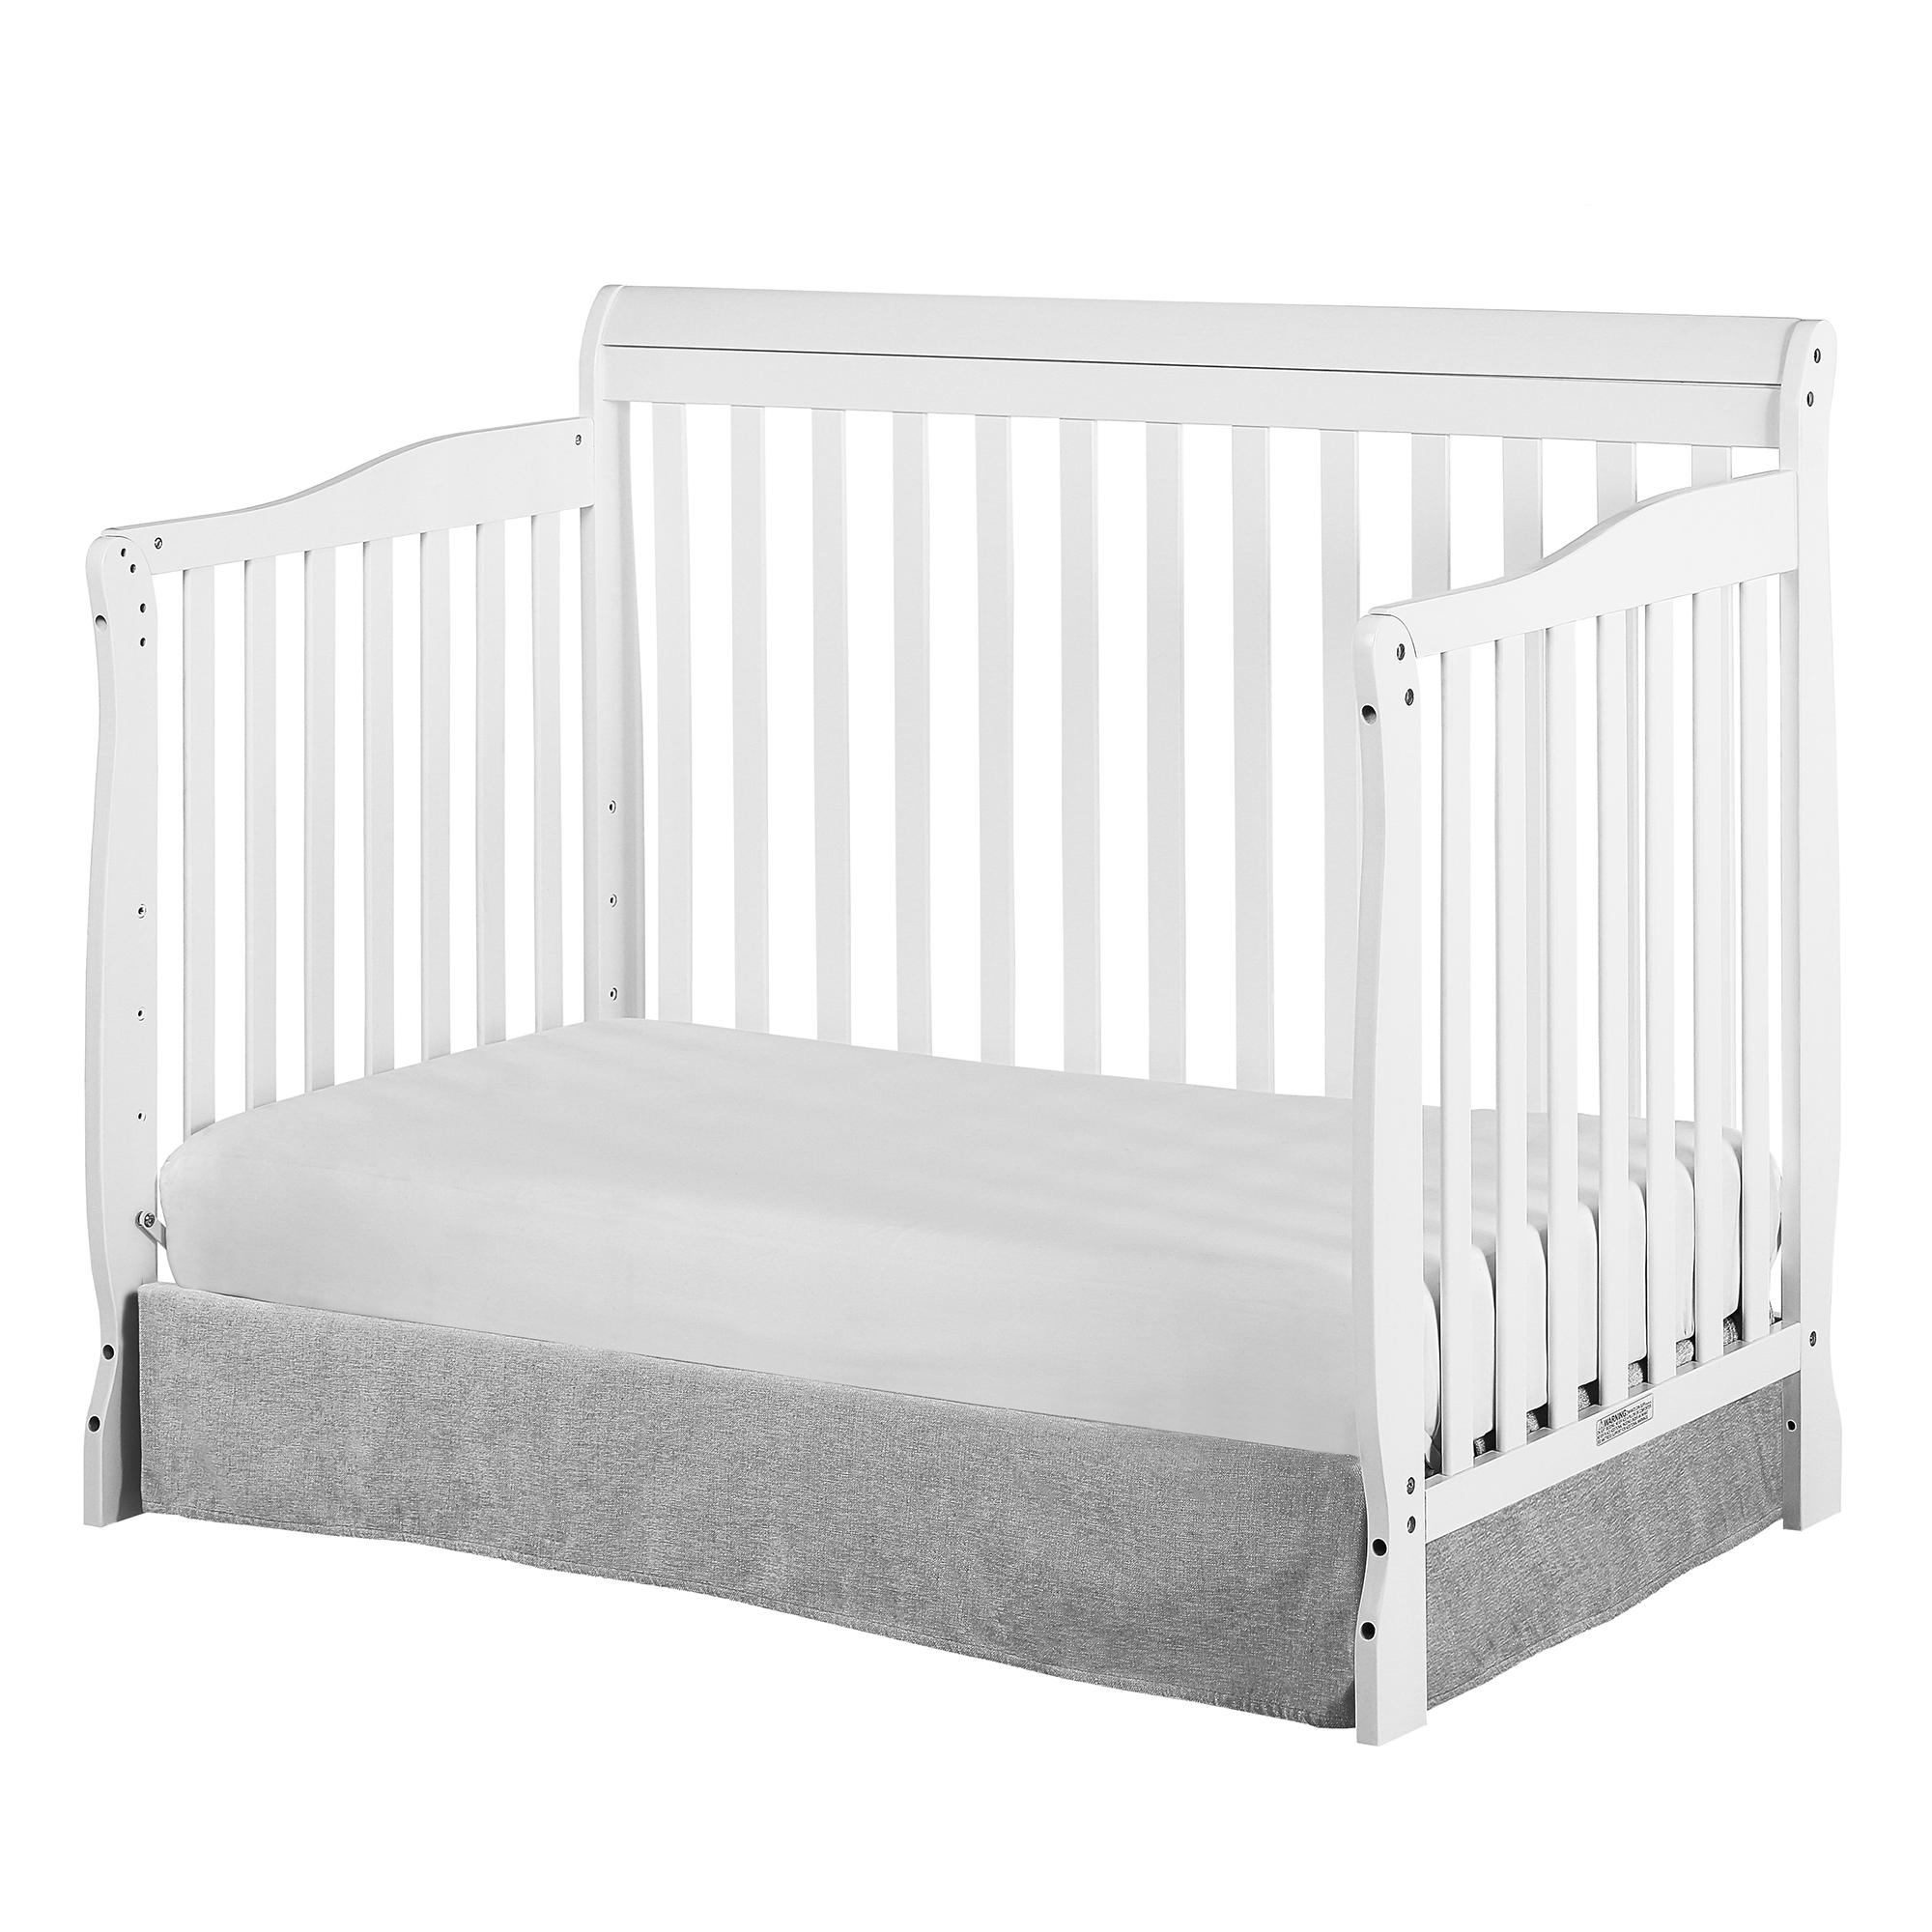 Dream On Me Ashton 5-in-1 Convertible Crib, White, Greenguard Gold and JPMA Certified - image 4 of 14